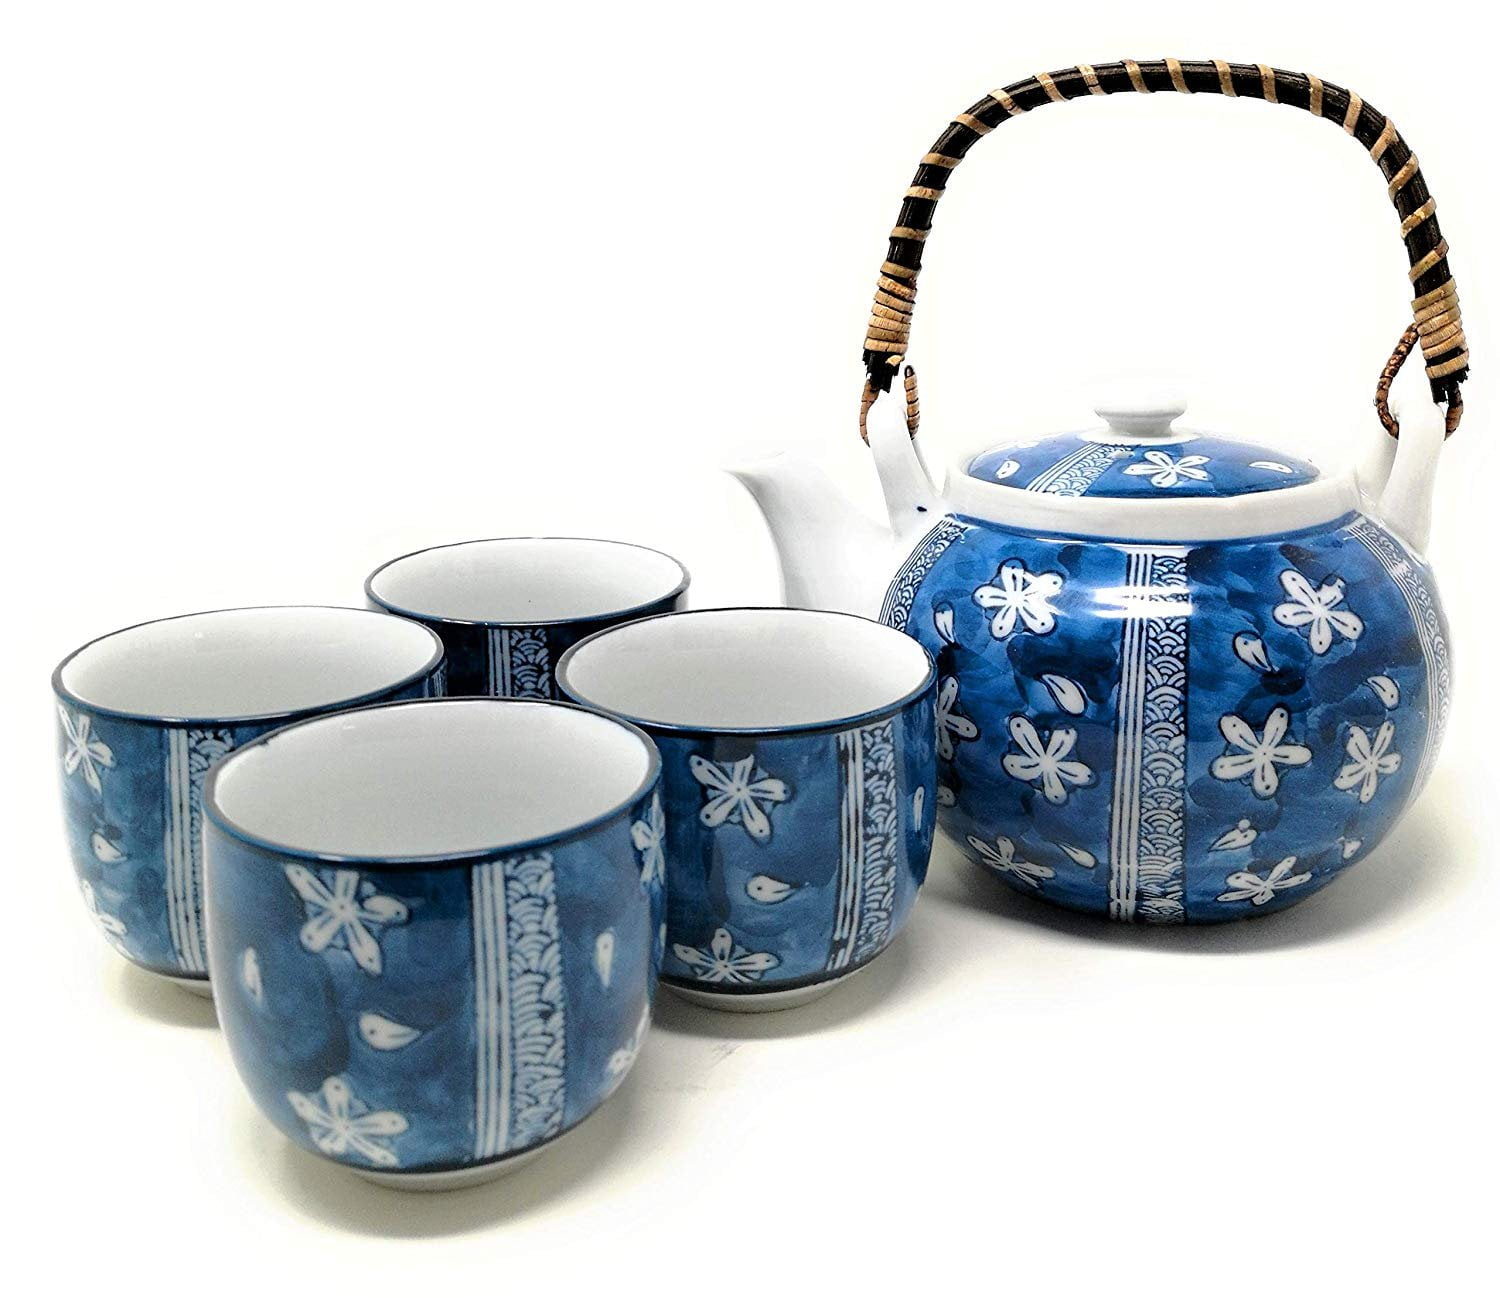 Havitar Coffee Cup Set Full Set of Chinese Bone China Ceramic Cup and Tea Tray Tea Set Tea Set Tea Cup Home Water Cup Blue